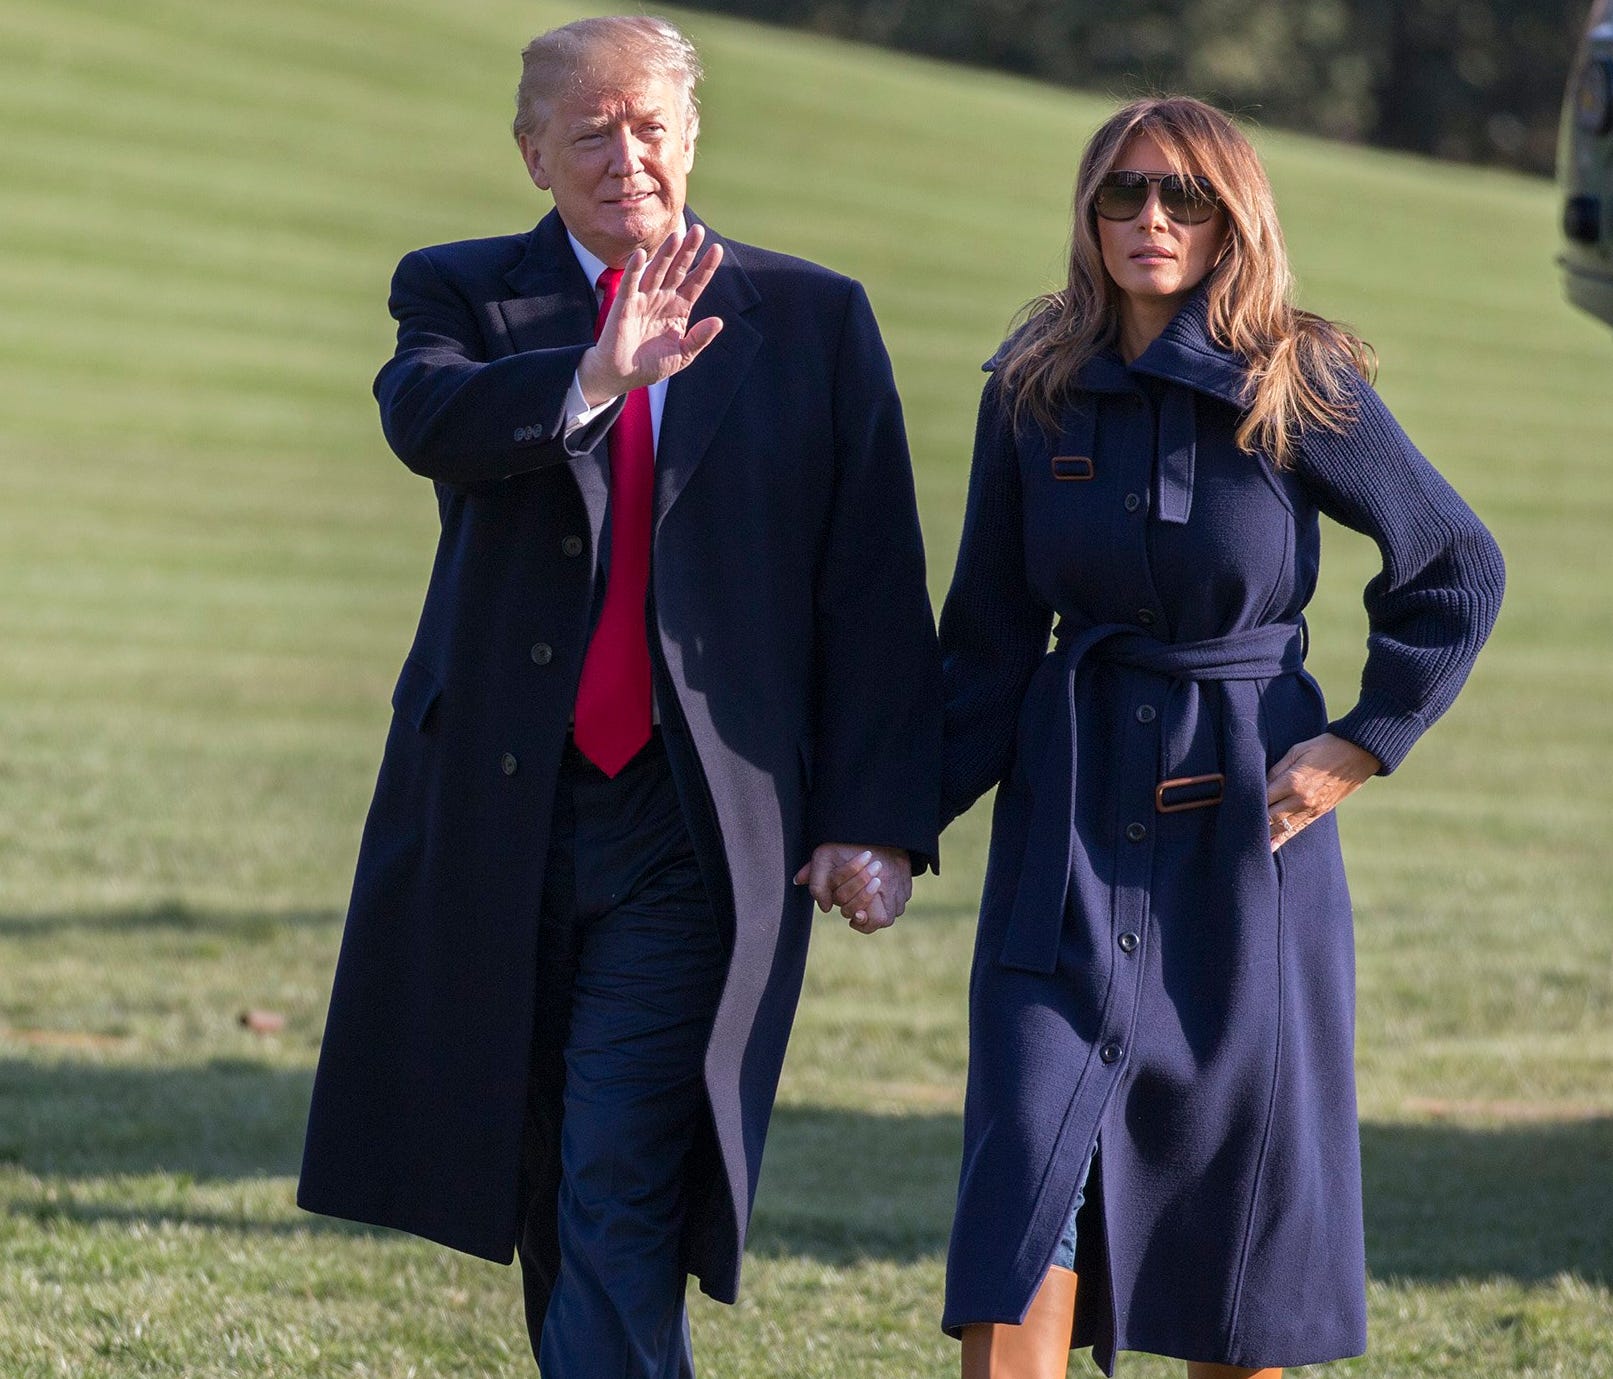 President Trump and first lady Melania Trump return to White House March 19, 2018, after attending an event on fighting the opioid crisis in Manchester, N.H.